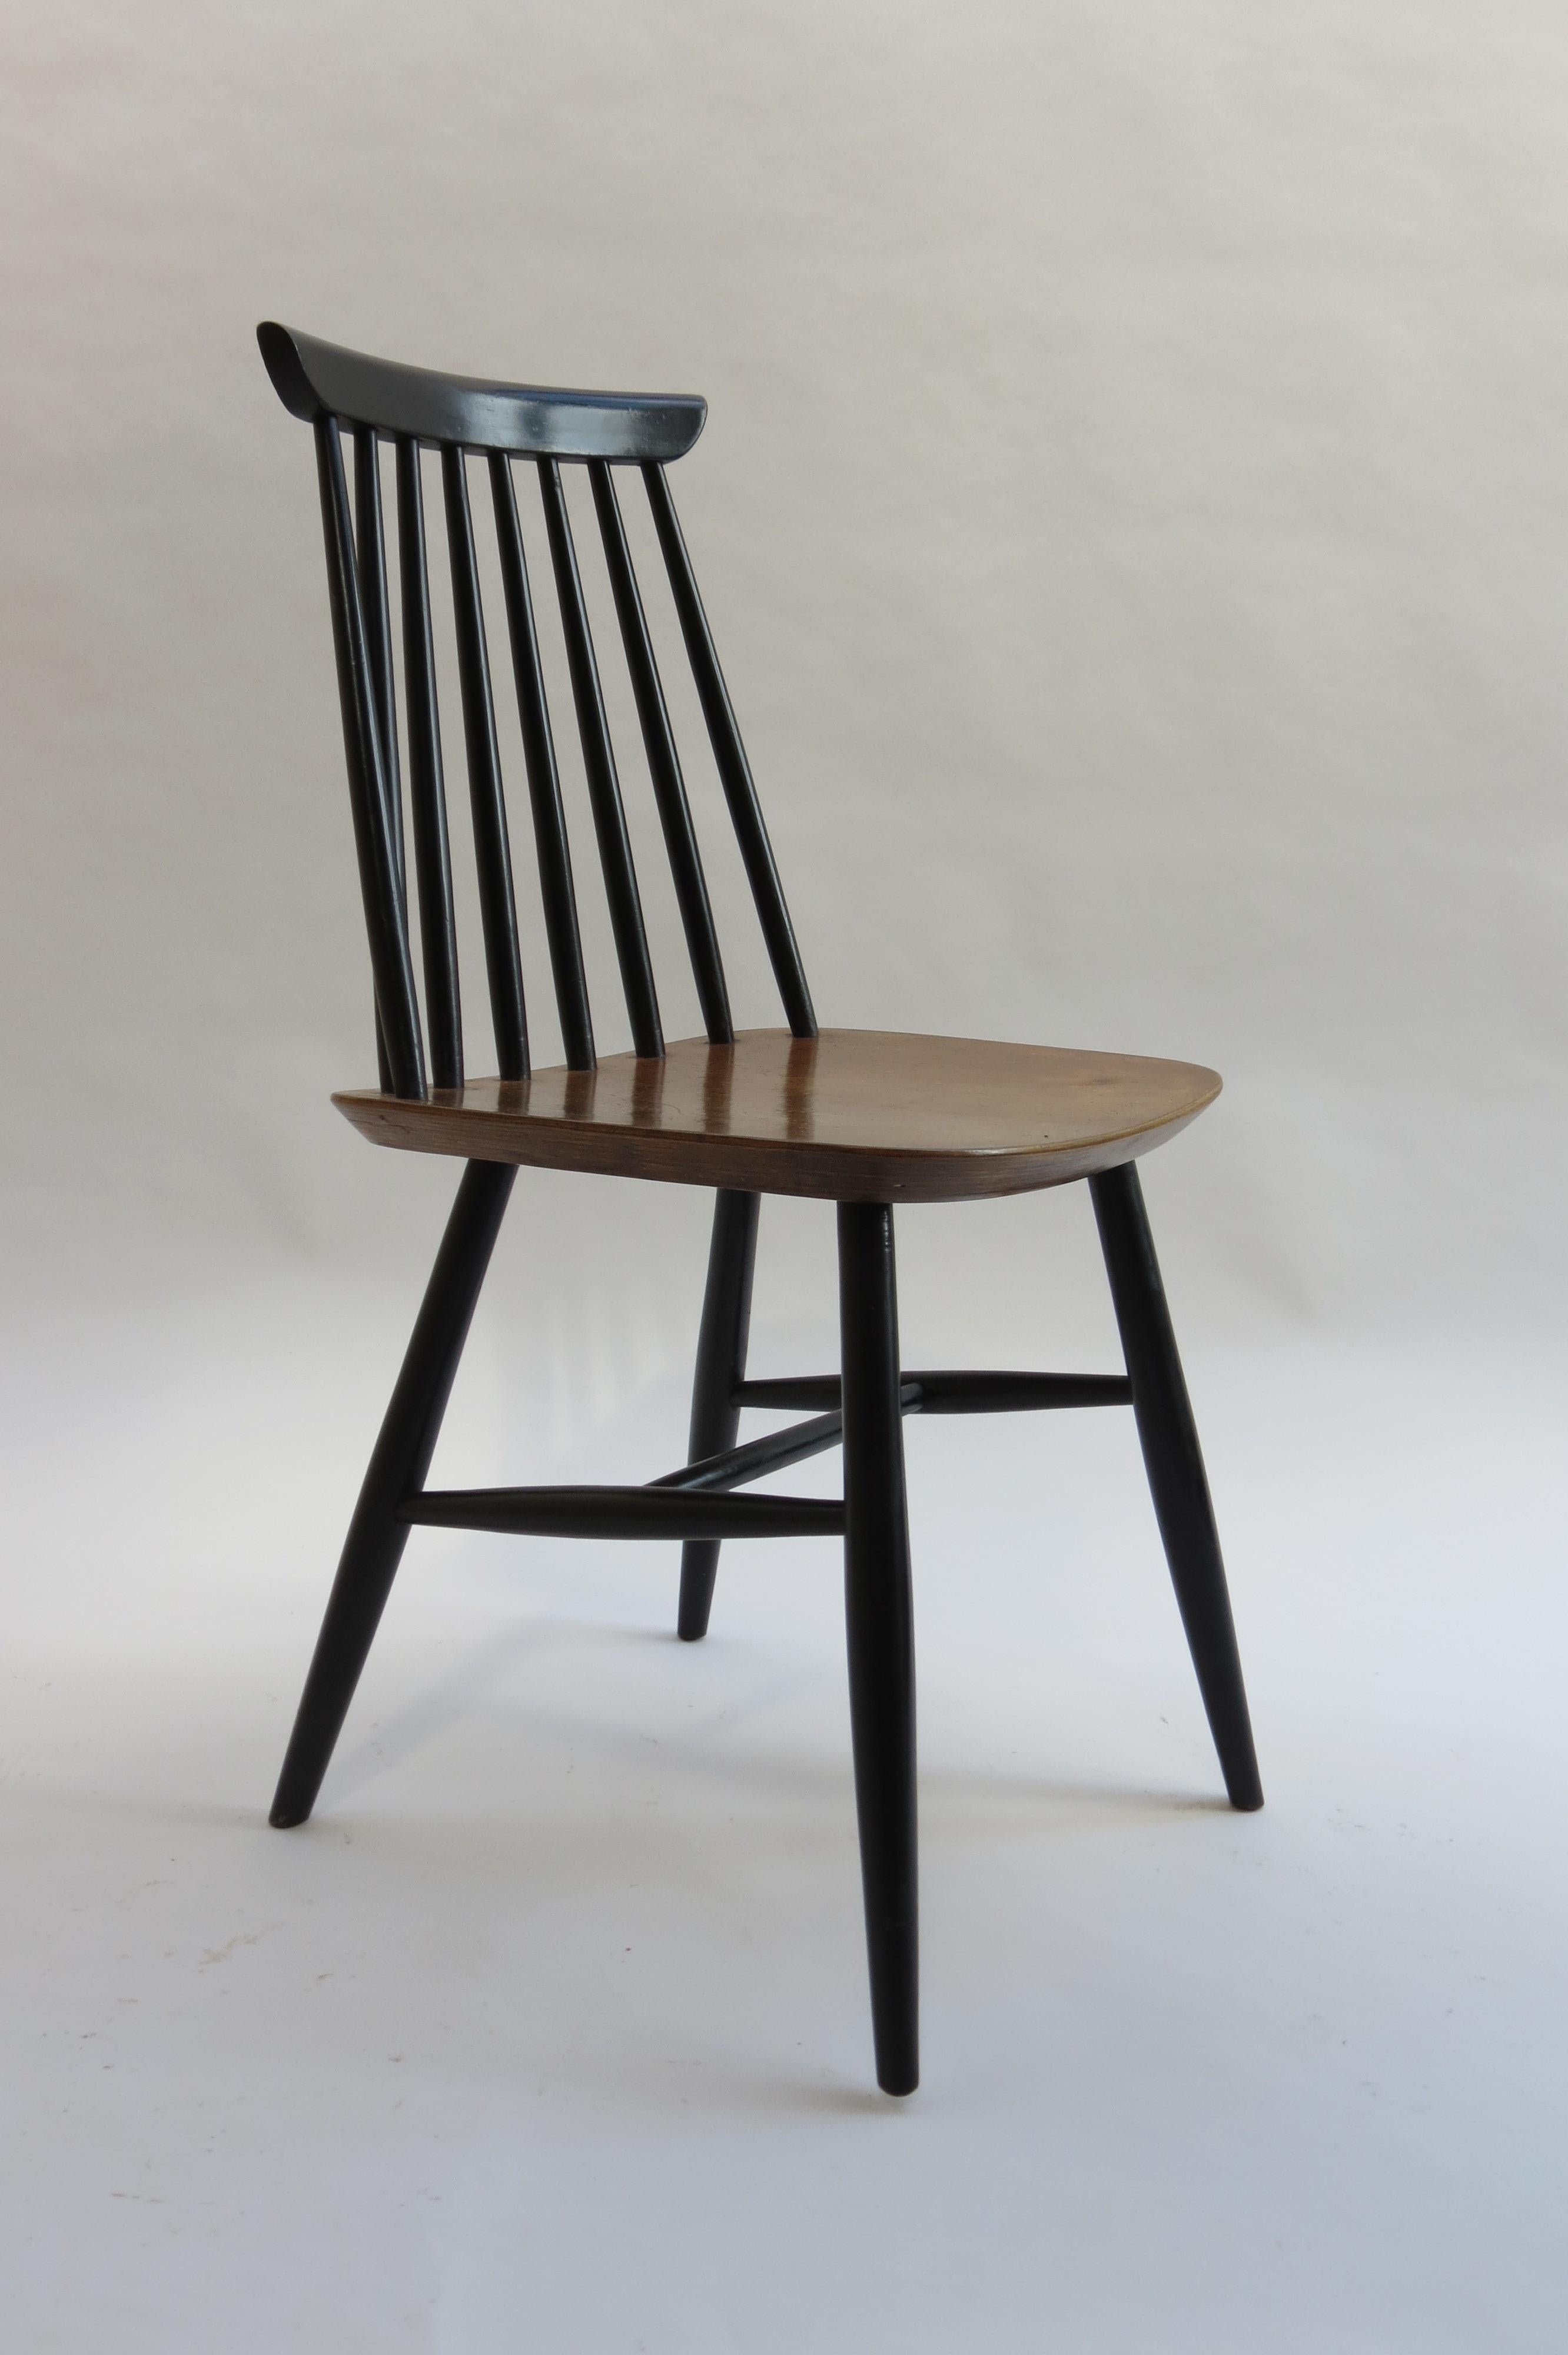 The 1950s Black and Walnut Dining Chair in the Style of Imari Tapiovaara (Englisch) im Angebot